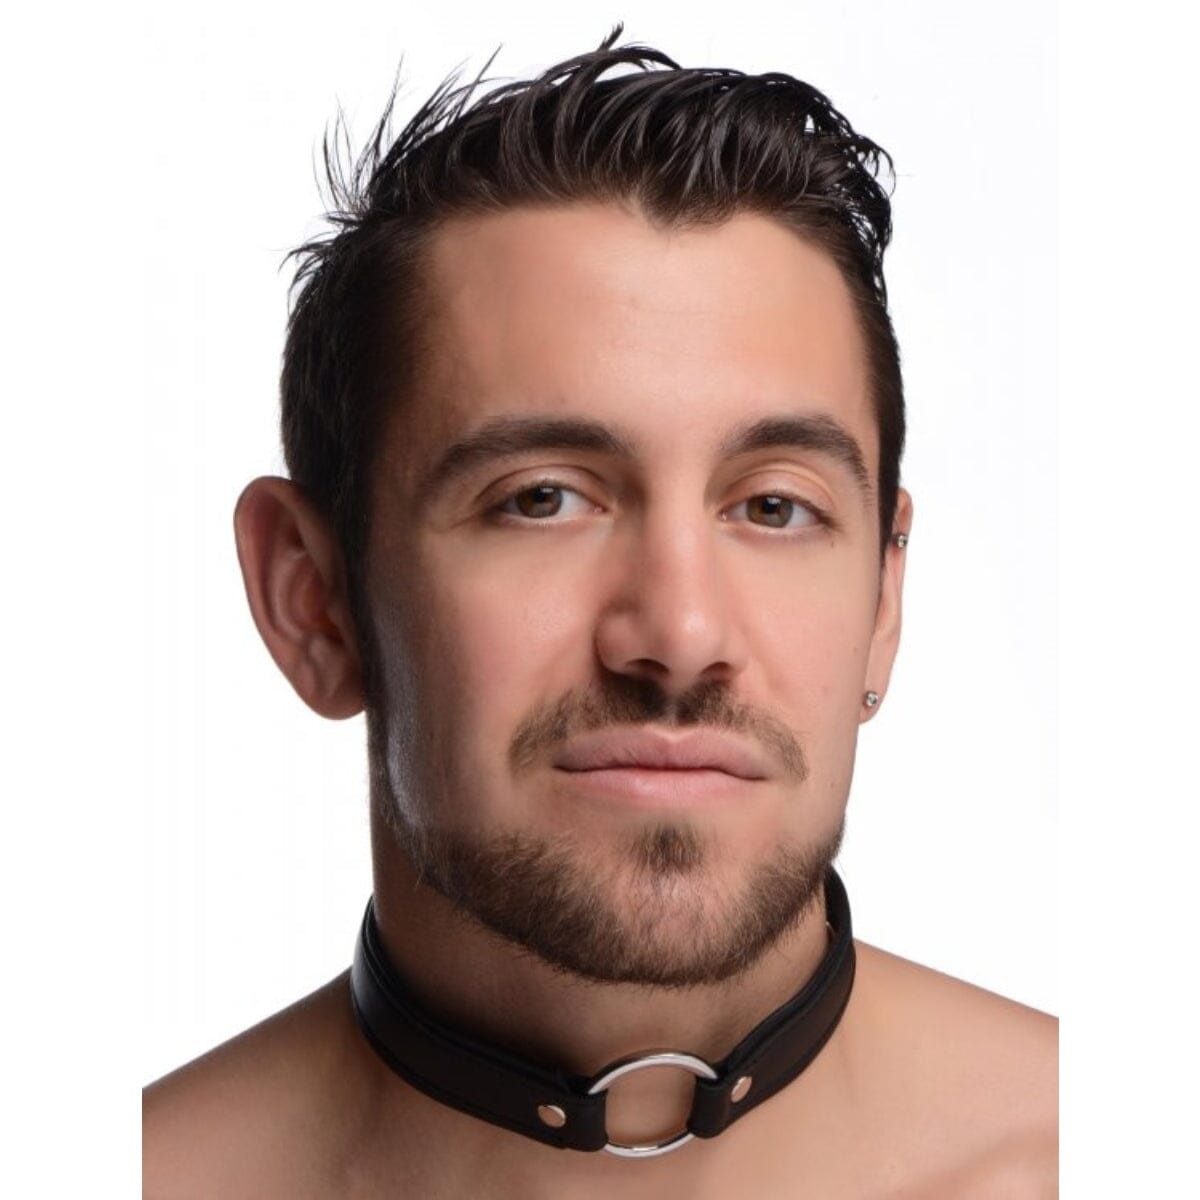 Strict O-Ring Collar Collars & Leads Strict (ABS) 